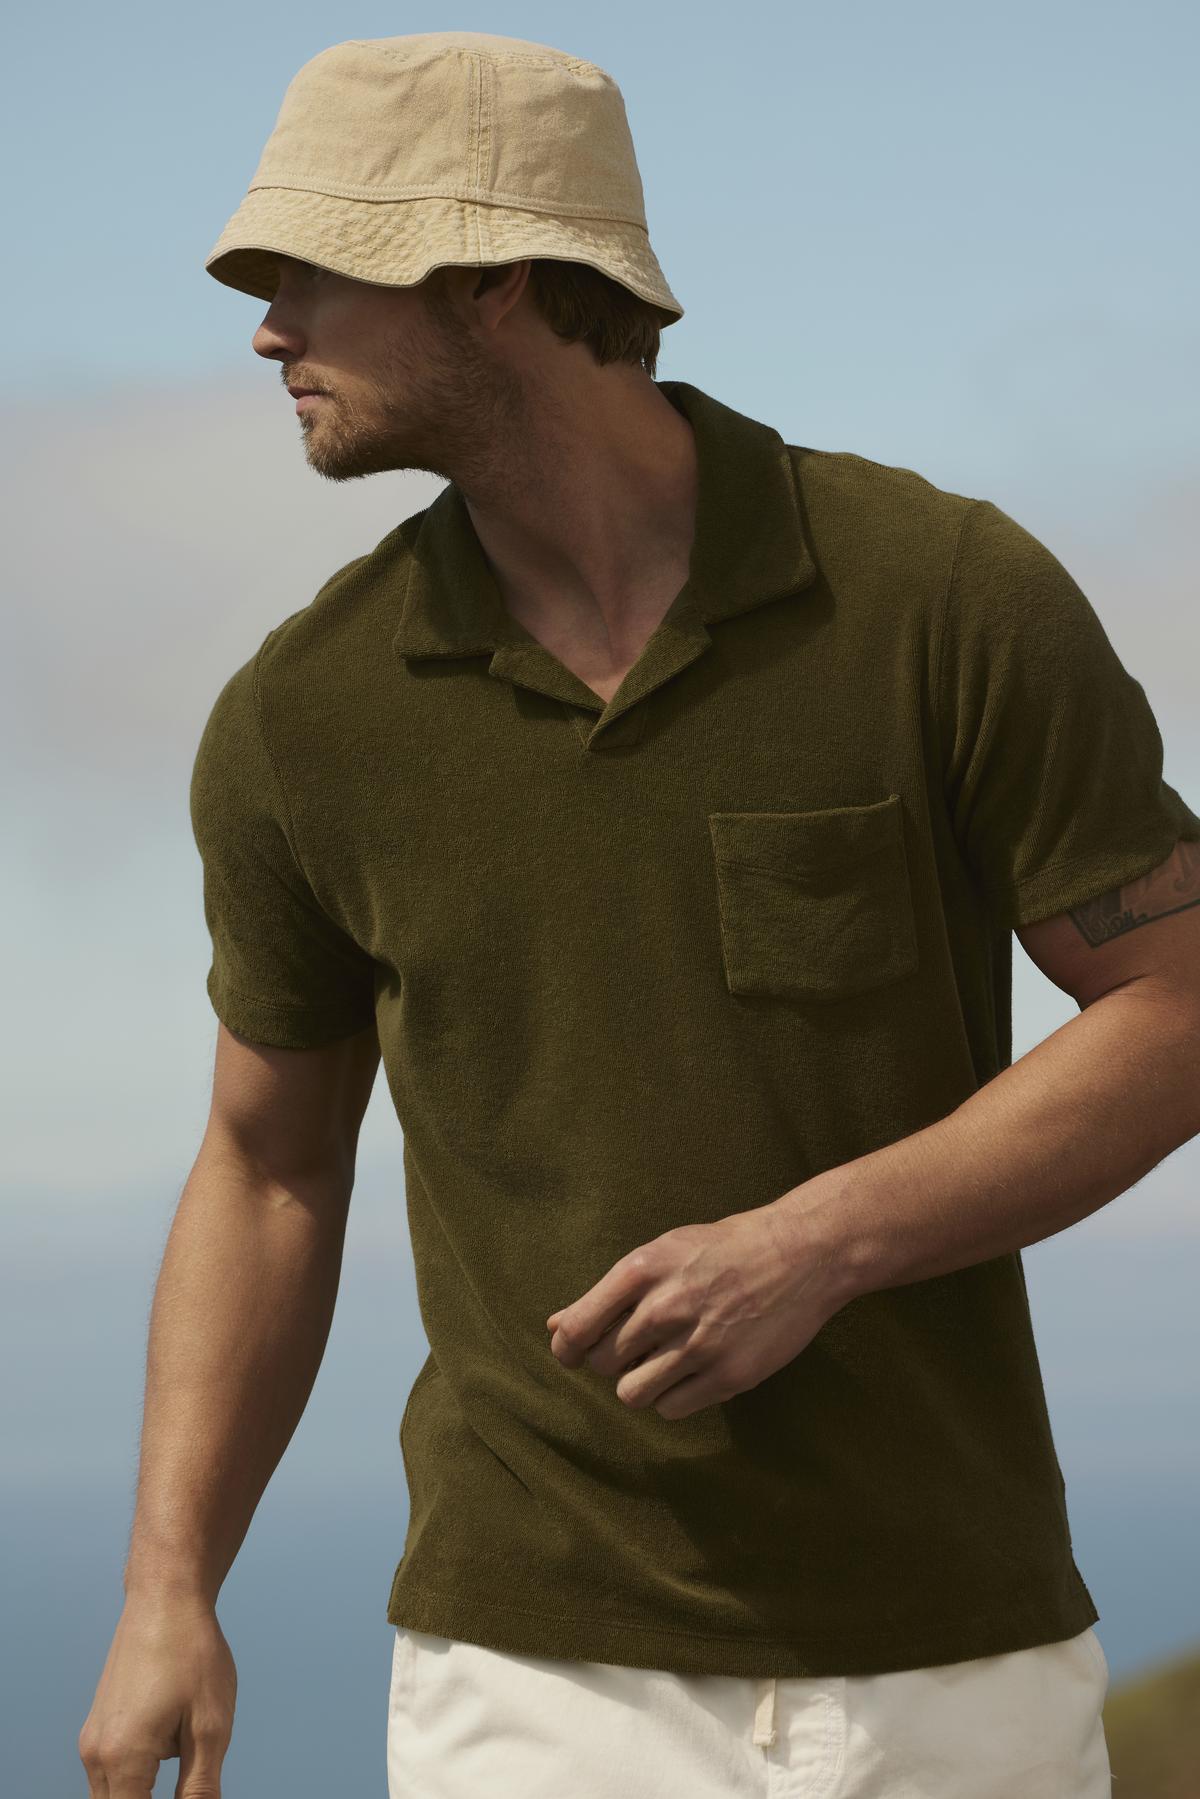 Man in a Velvet by Graham & Spencer Sergey polo shirt and beige hat, looking to the side, standing outdoors with a blurred landscape in the background.-36753587929281